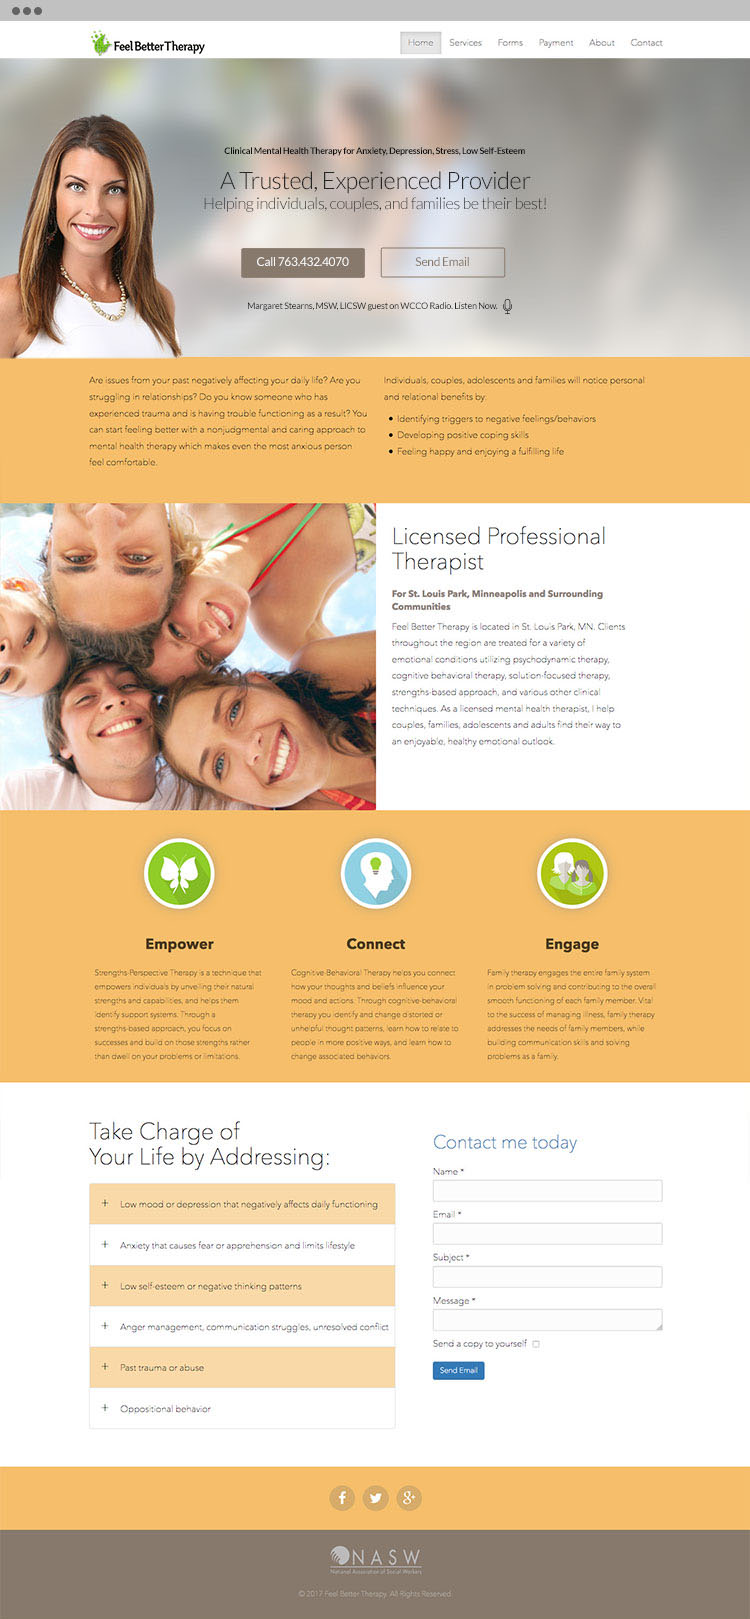 Case study of a mental health provider website